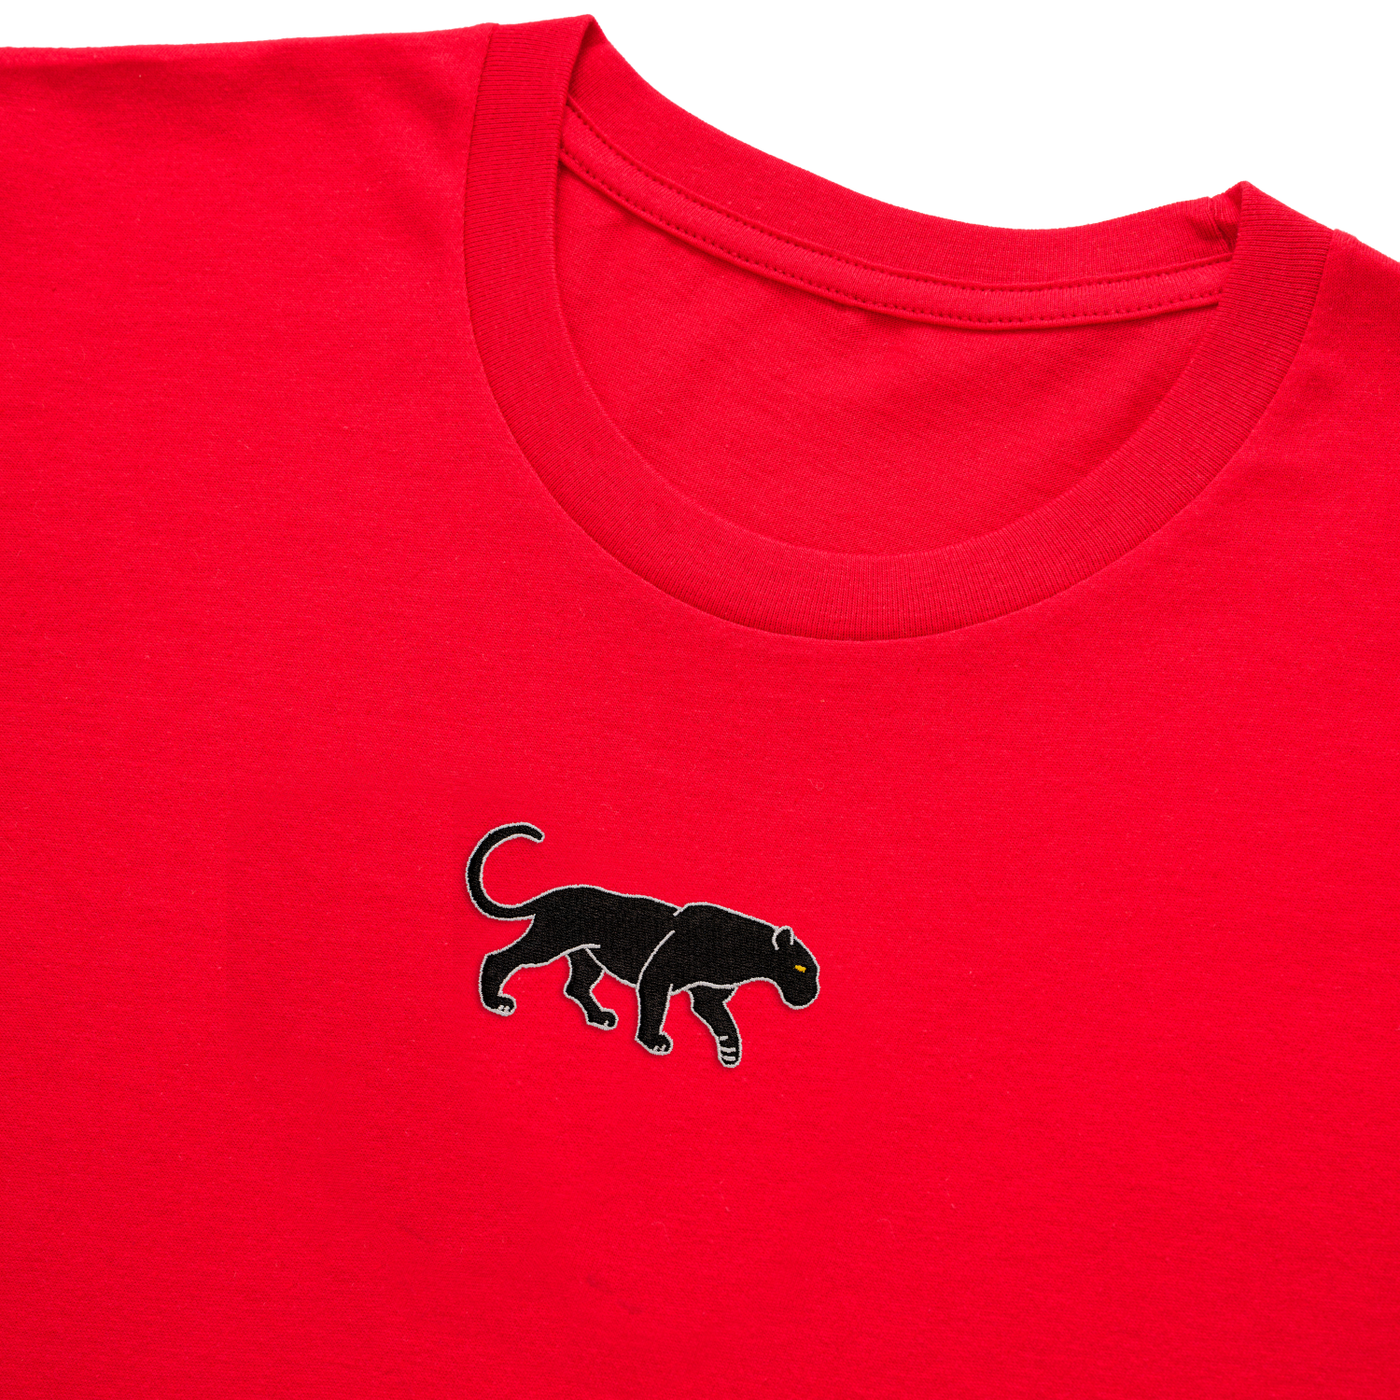 Bobby's Planet Men's Embroidered Black Jaguar T-Shirt from South American Amazon Animals Collection in Red Color#color_red